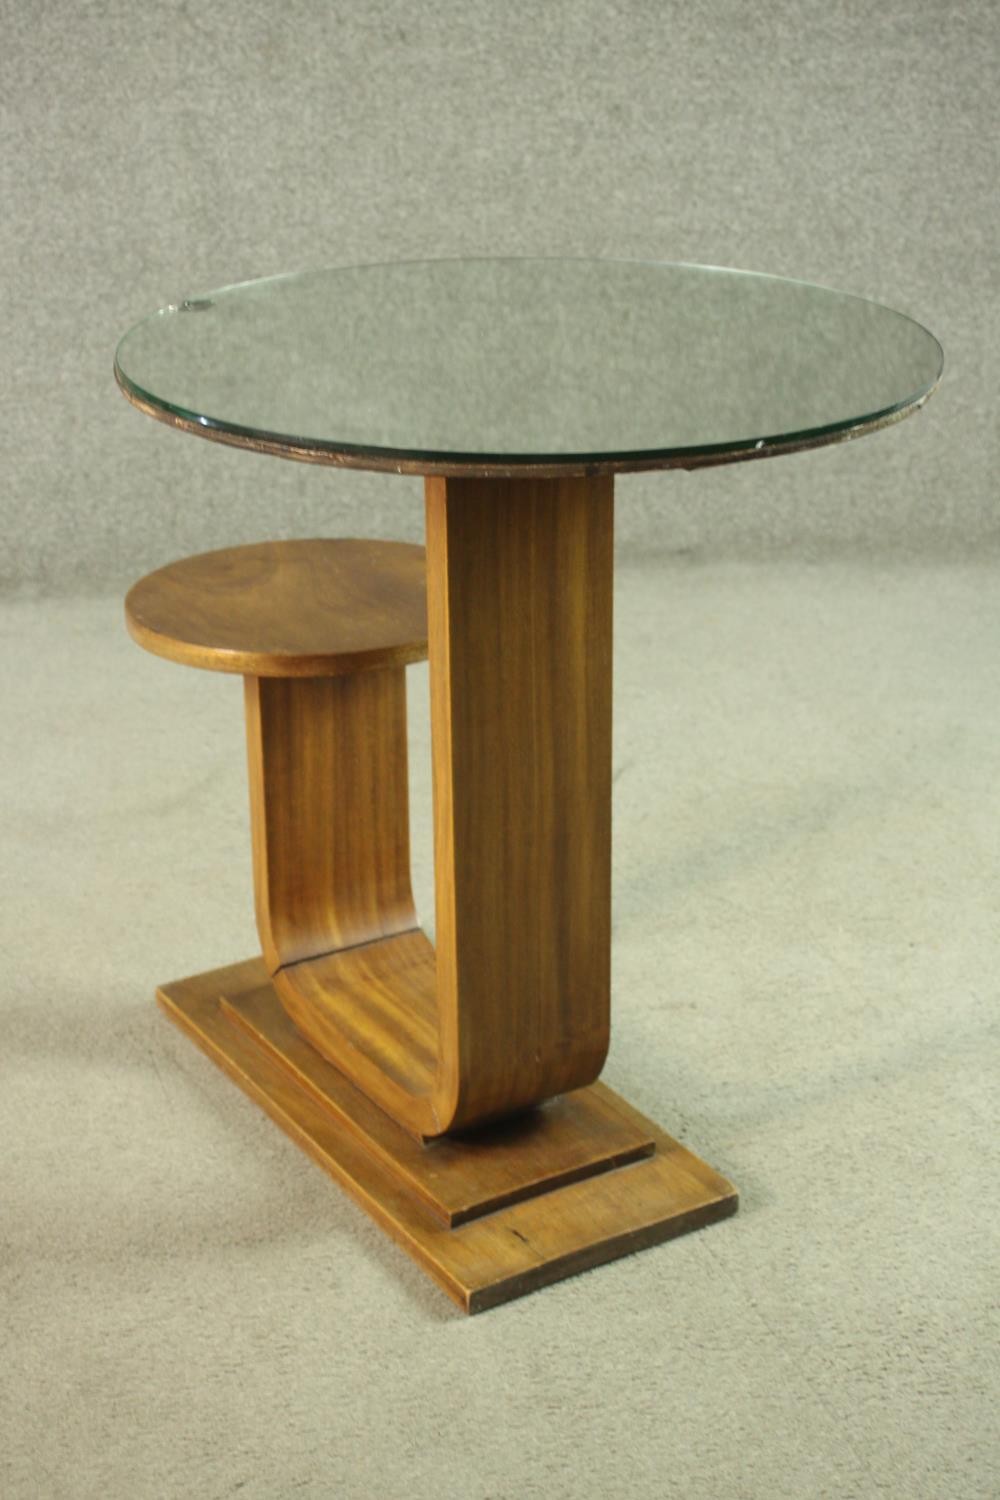 An Art Deco teak table and stool, with a circular glass table top, on a support which curves up to a - Image 8 of 8